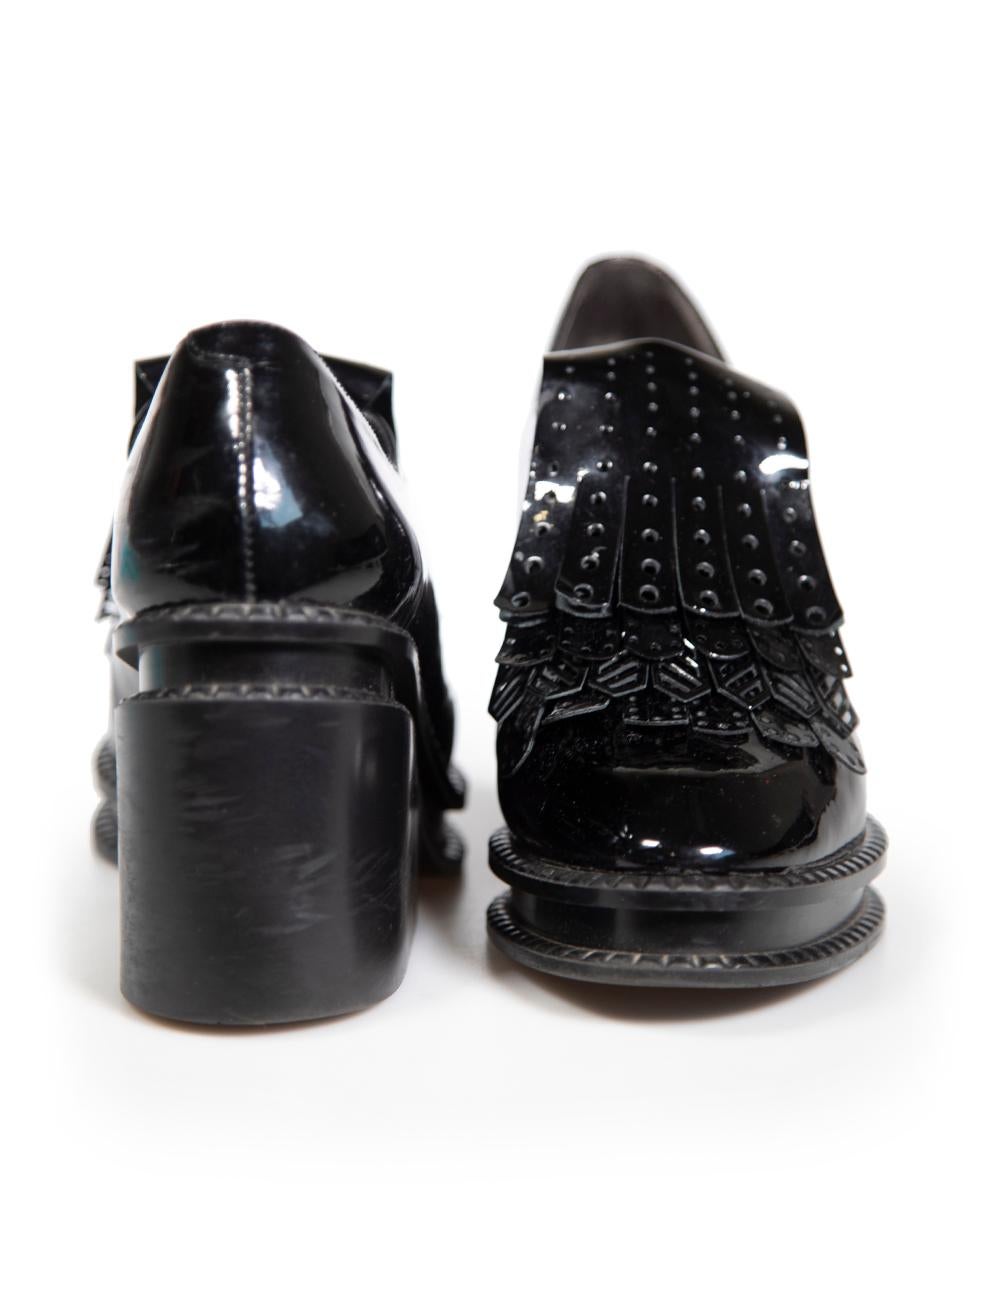 Clergerie Black Patent Leather Fringe Heeled Loafers Size IT 38 In Good Condition For Sale In London, GB